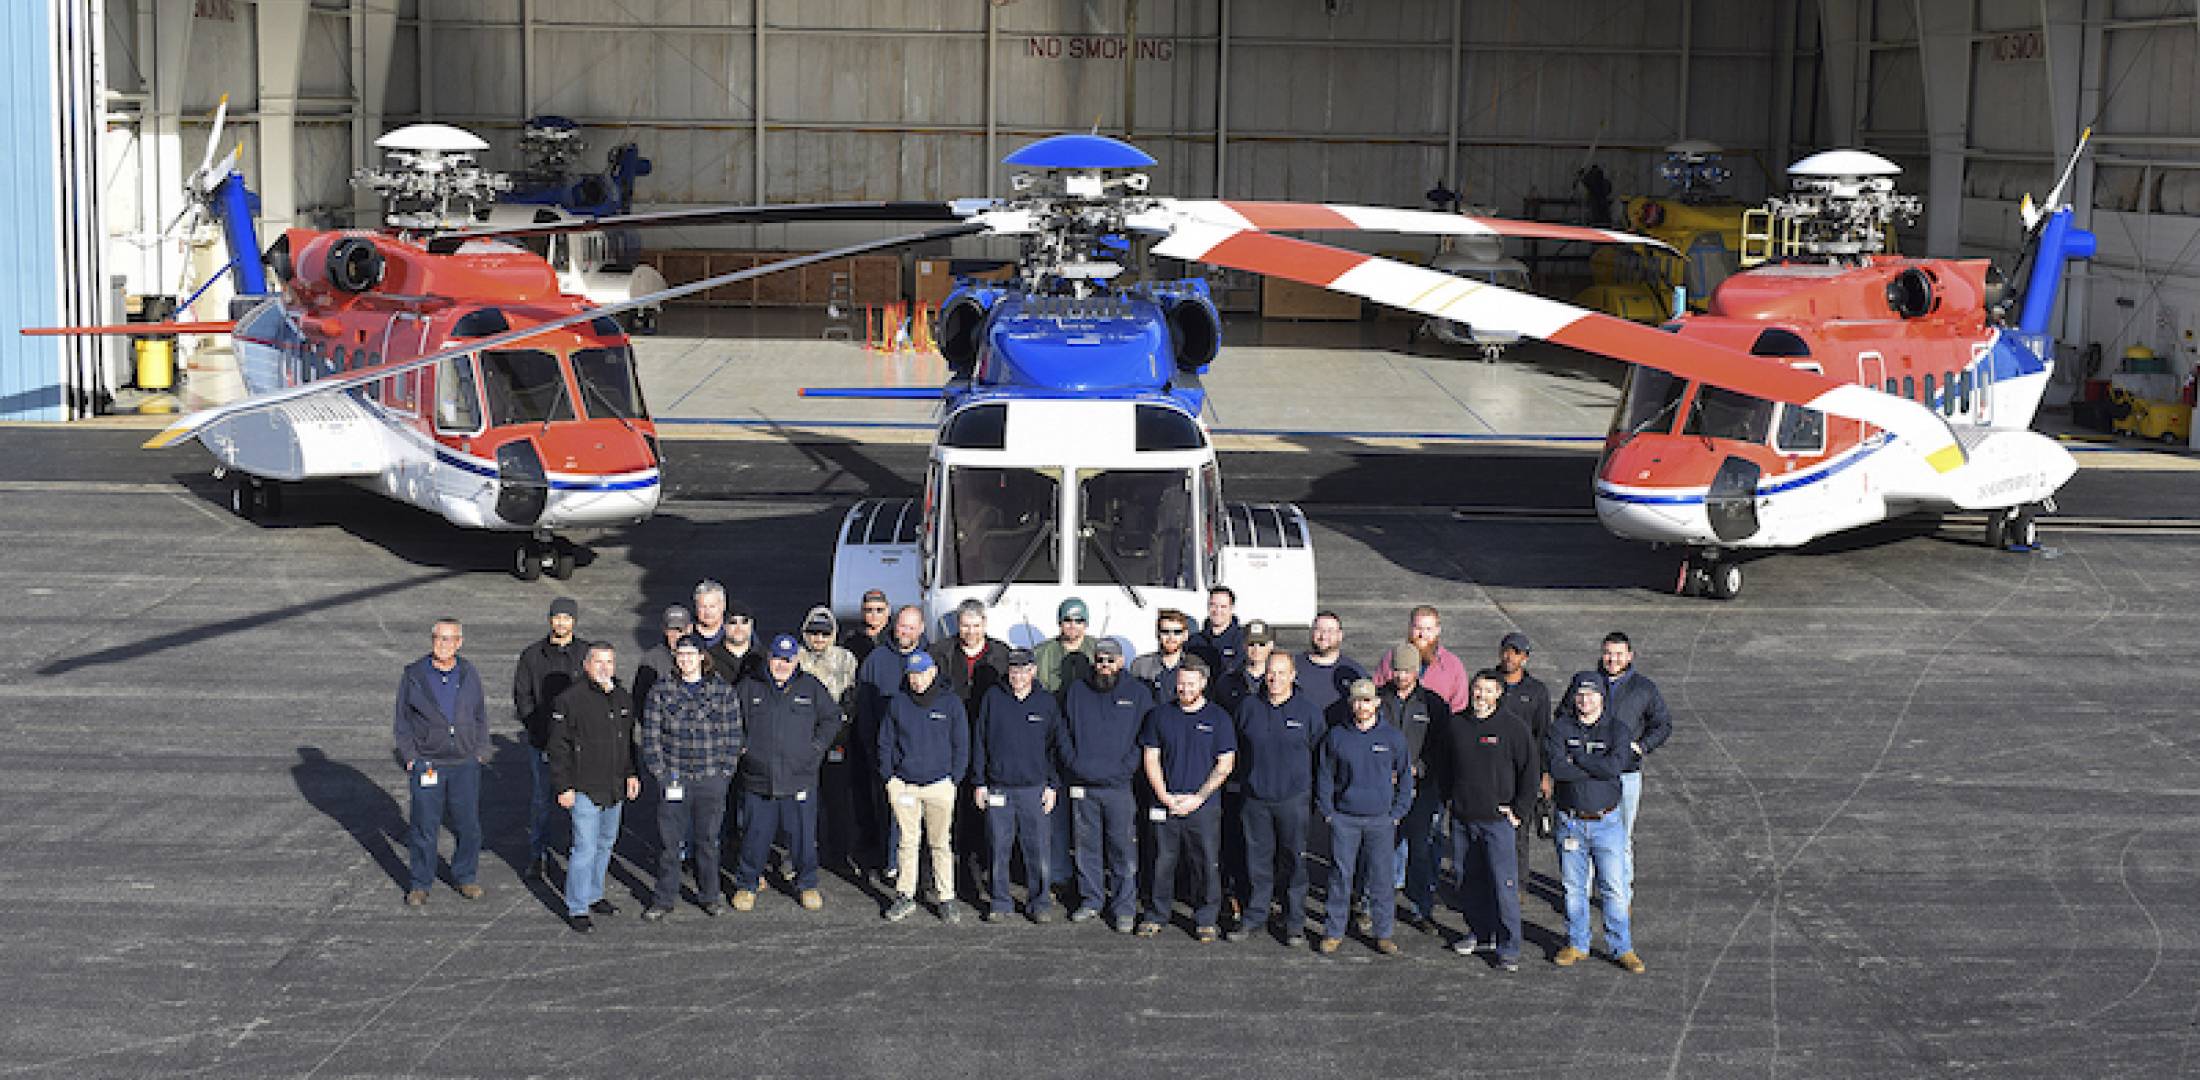 Photo of Summit Aviation team and helicopters outside hangar